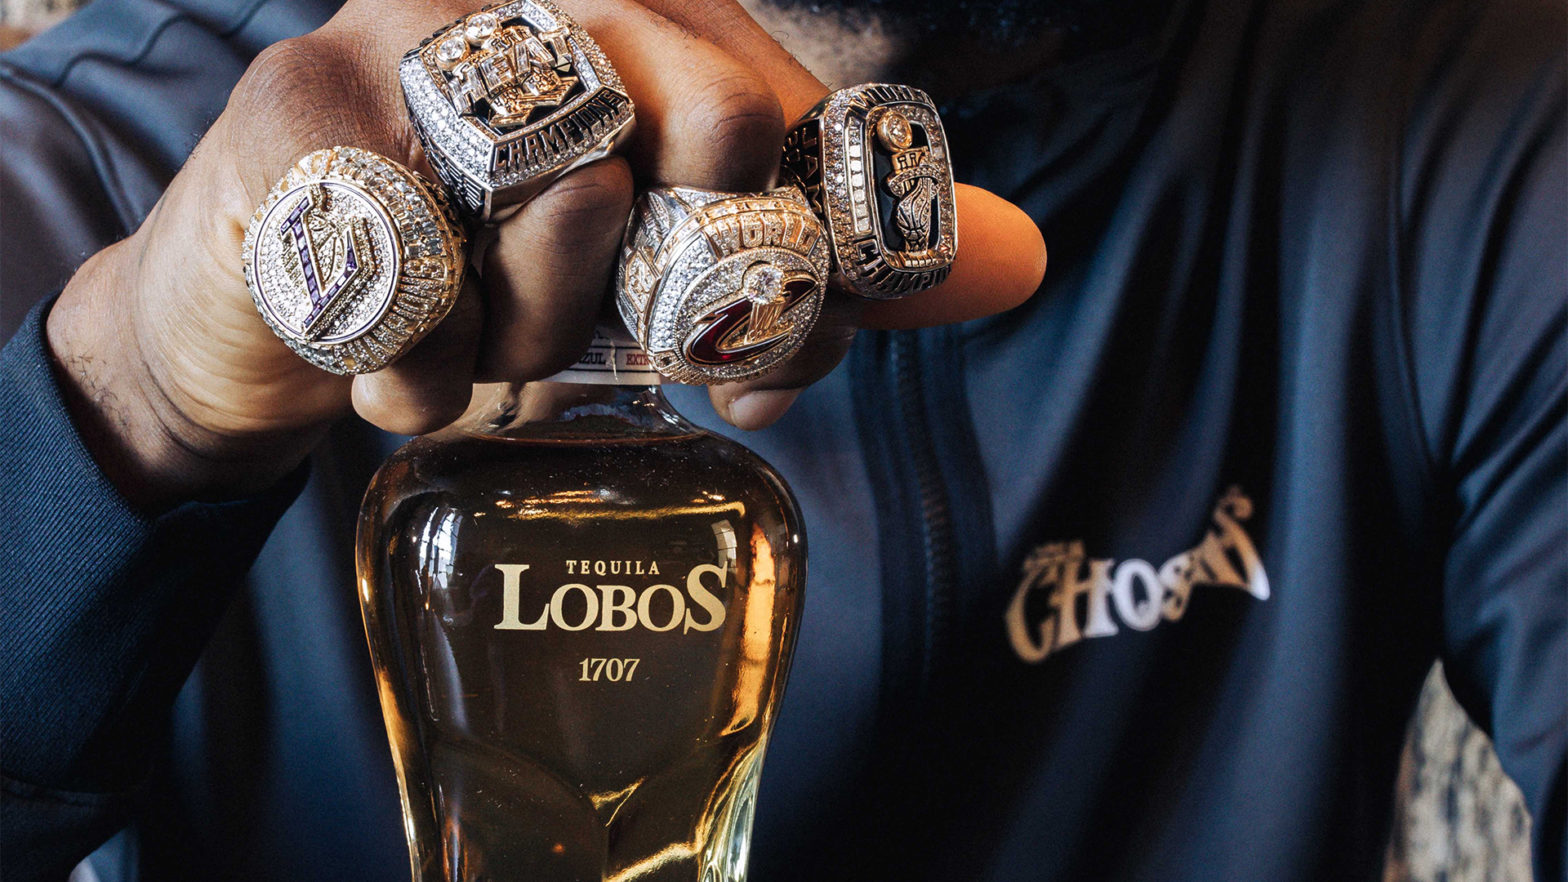 LeBron James Dons All His Championship Rings To Promote New Lobos 1707 Extra Anejo Tequila Bottle